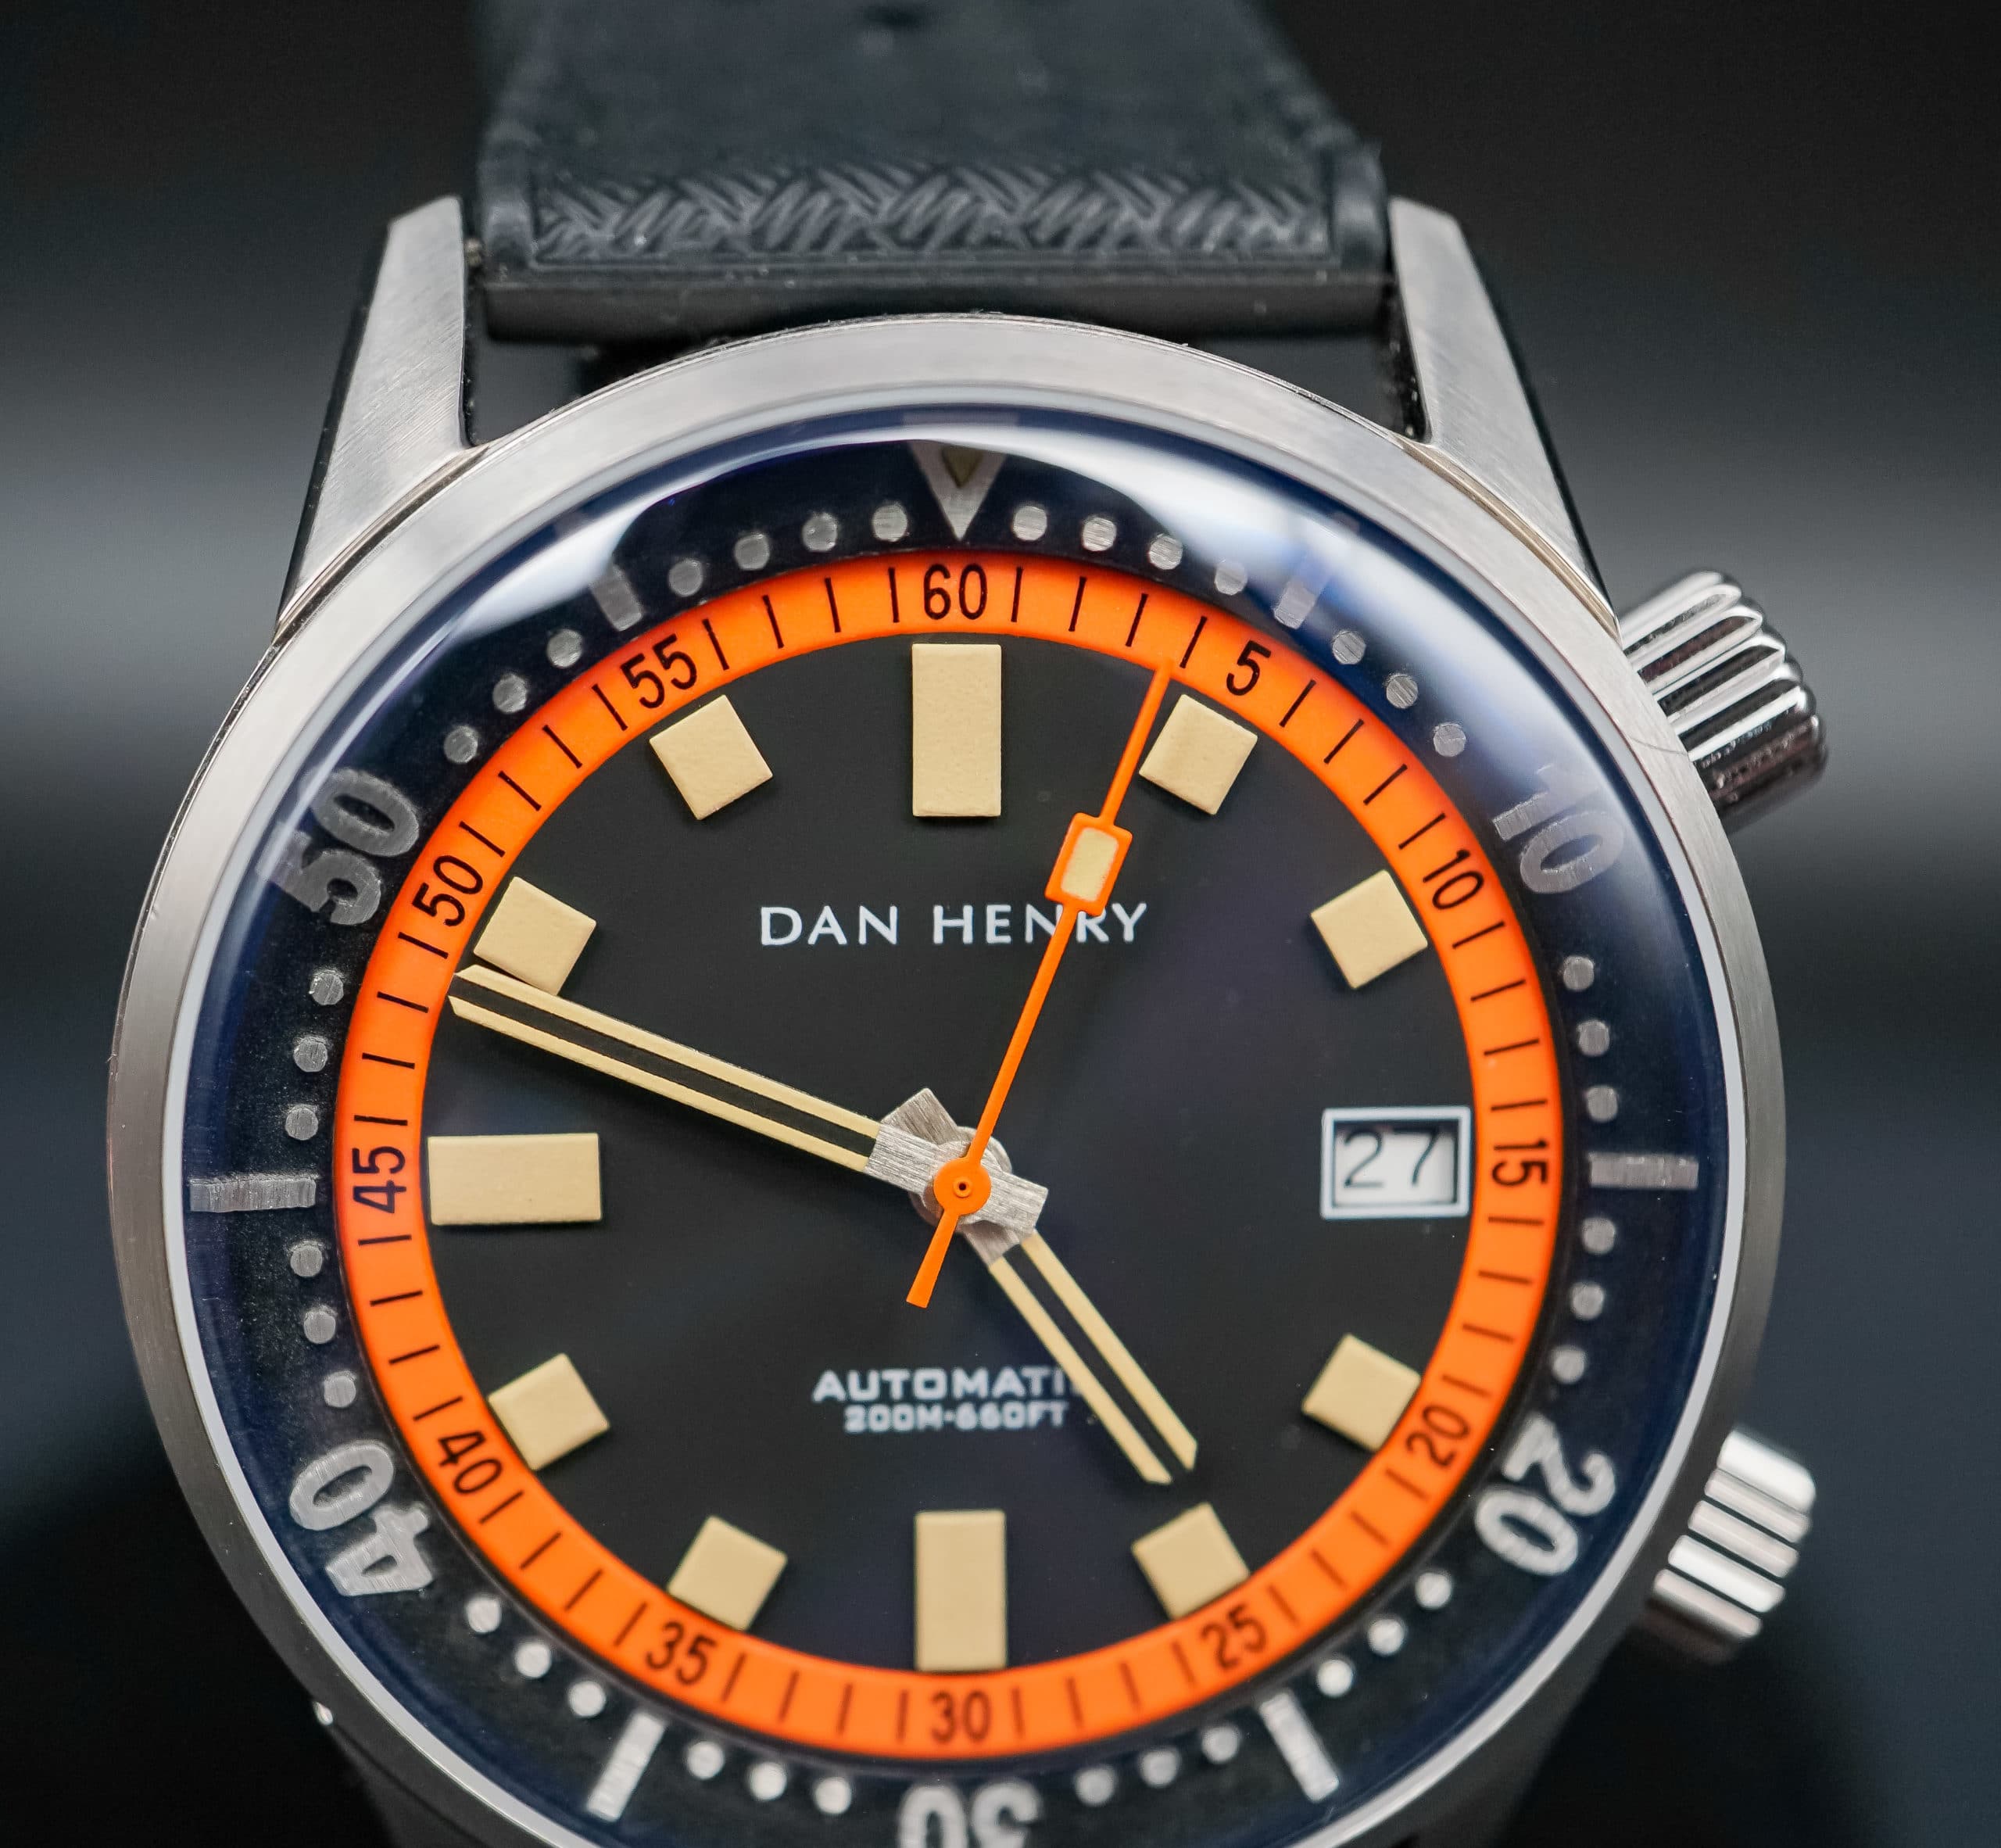 Dan Henry 1970 Review: With Great Value Comes Great Pre-Owned Markups